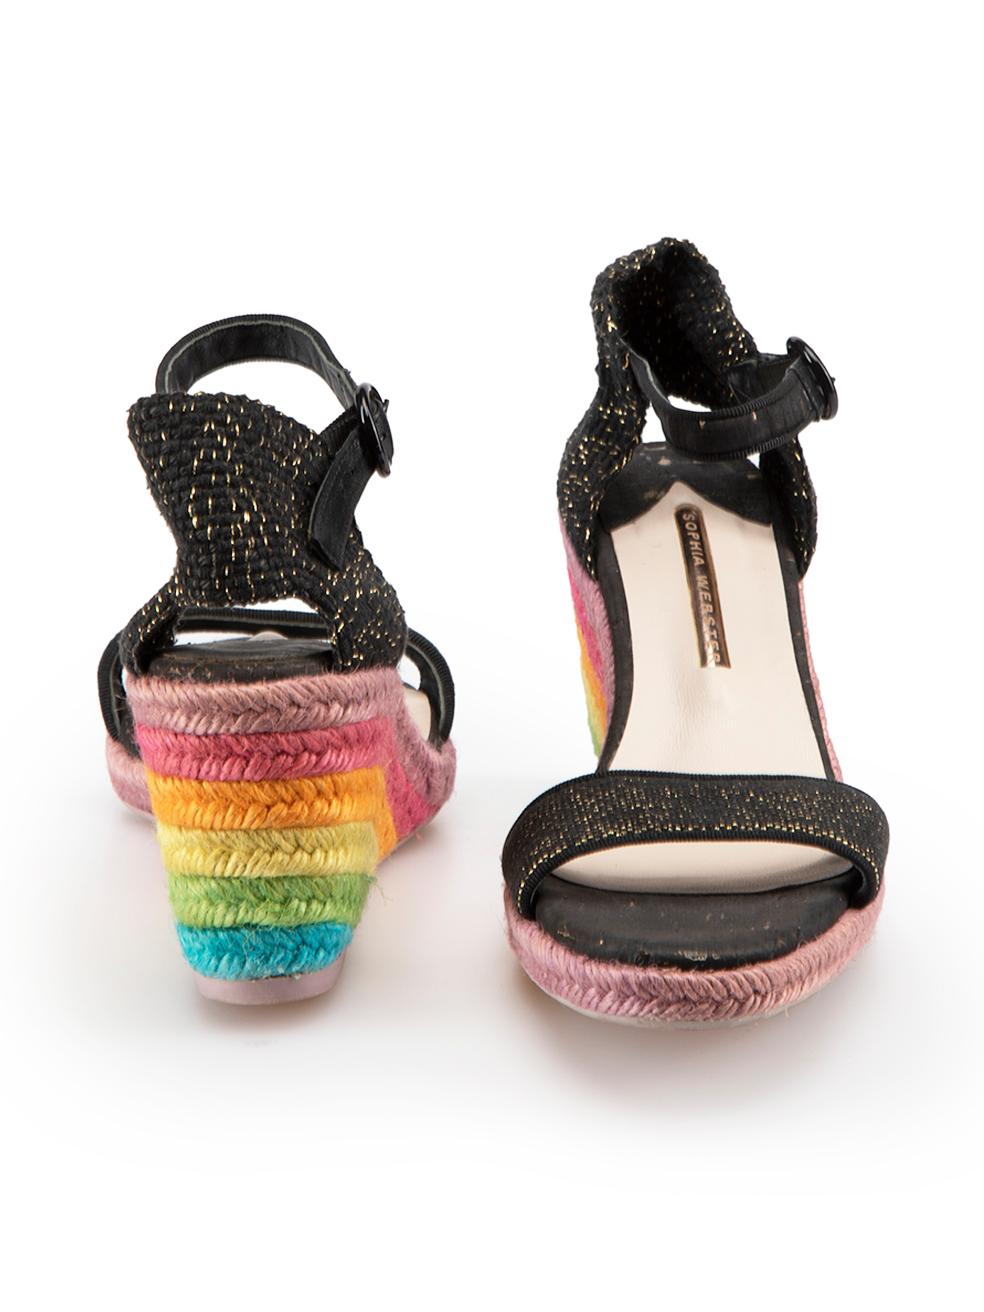 Peep Toe Rainbow Wedge Espadrilles Size EU 39 In Good Condition For Sale In London, GB